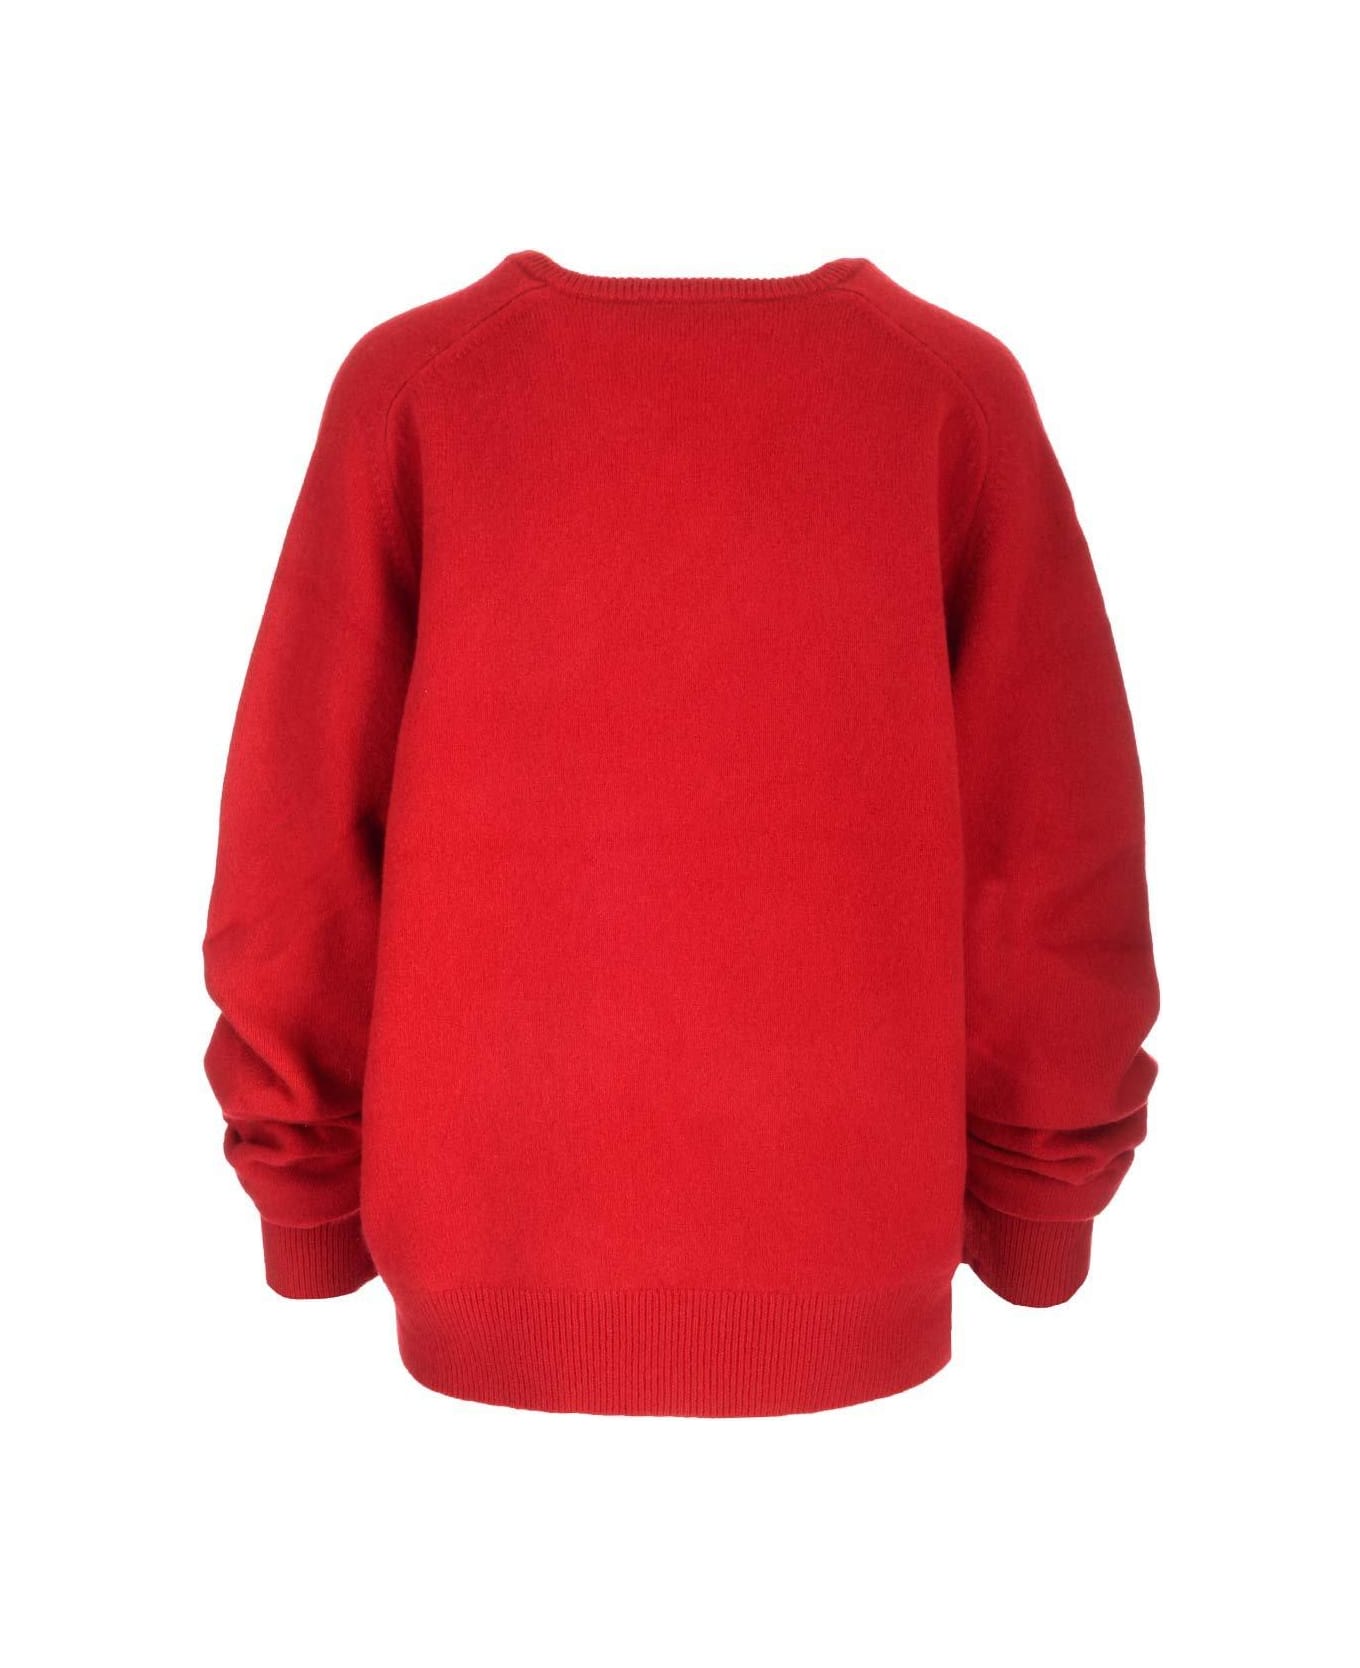 Tory Burch V-neck Long-sleeved Sweater - Red